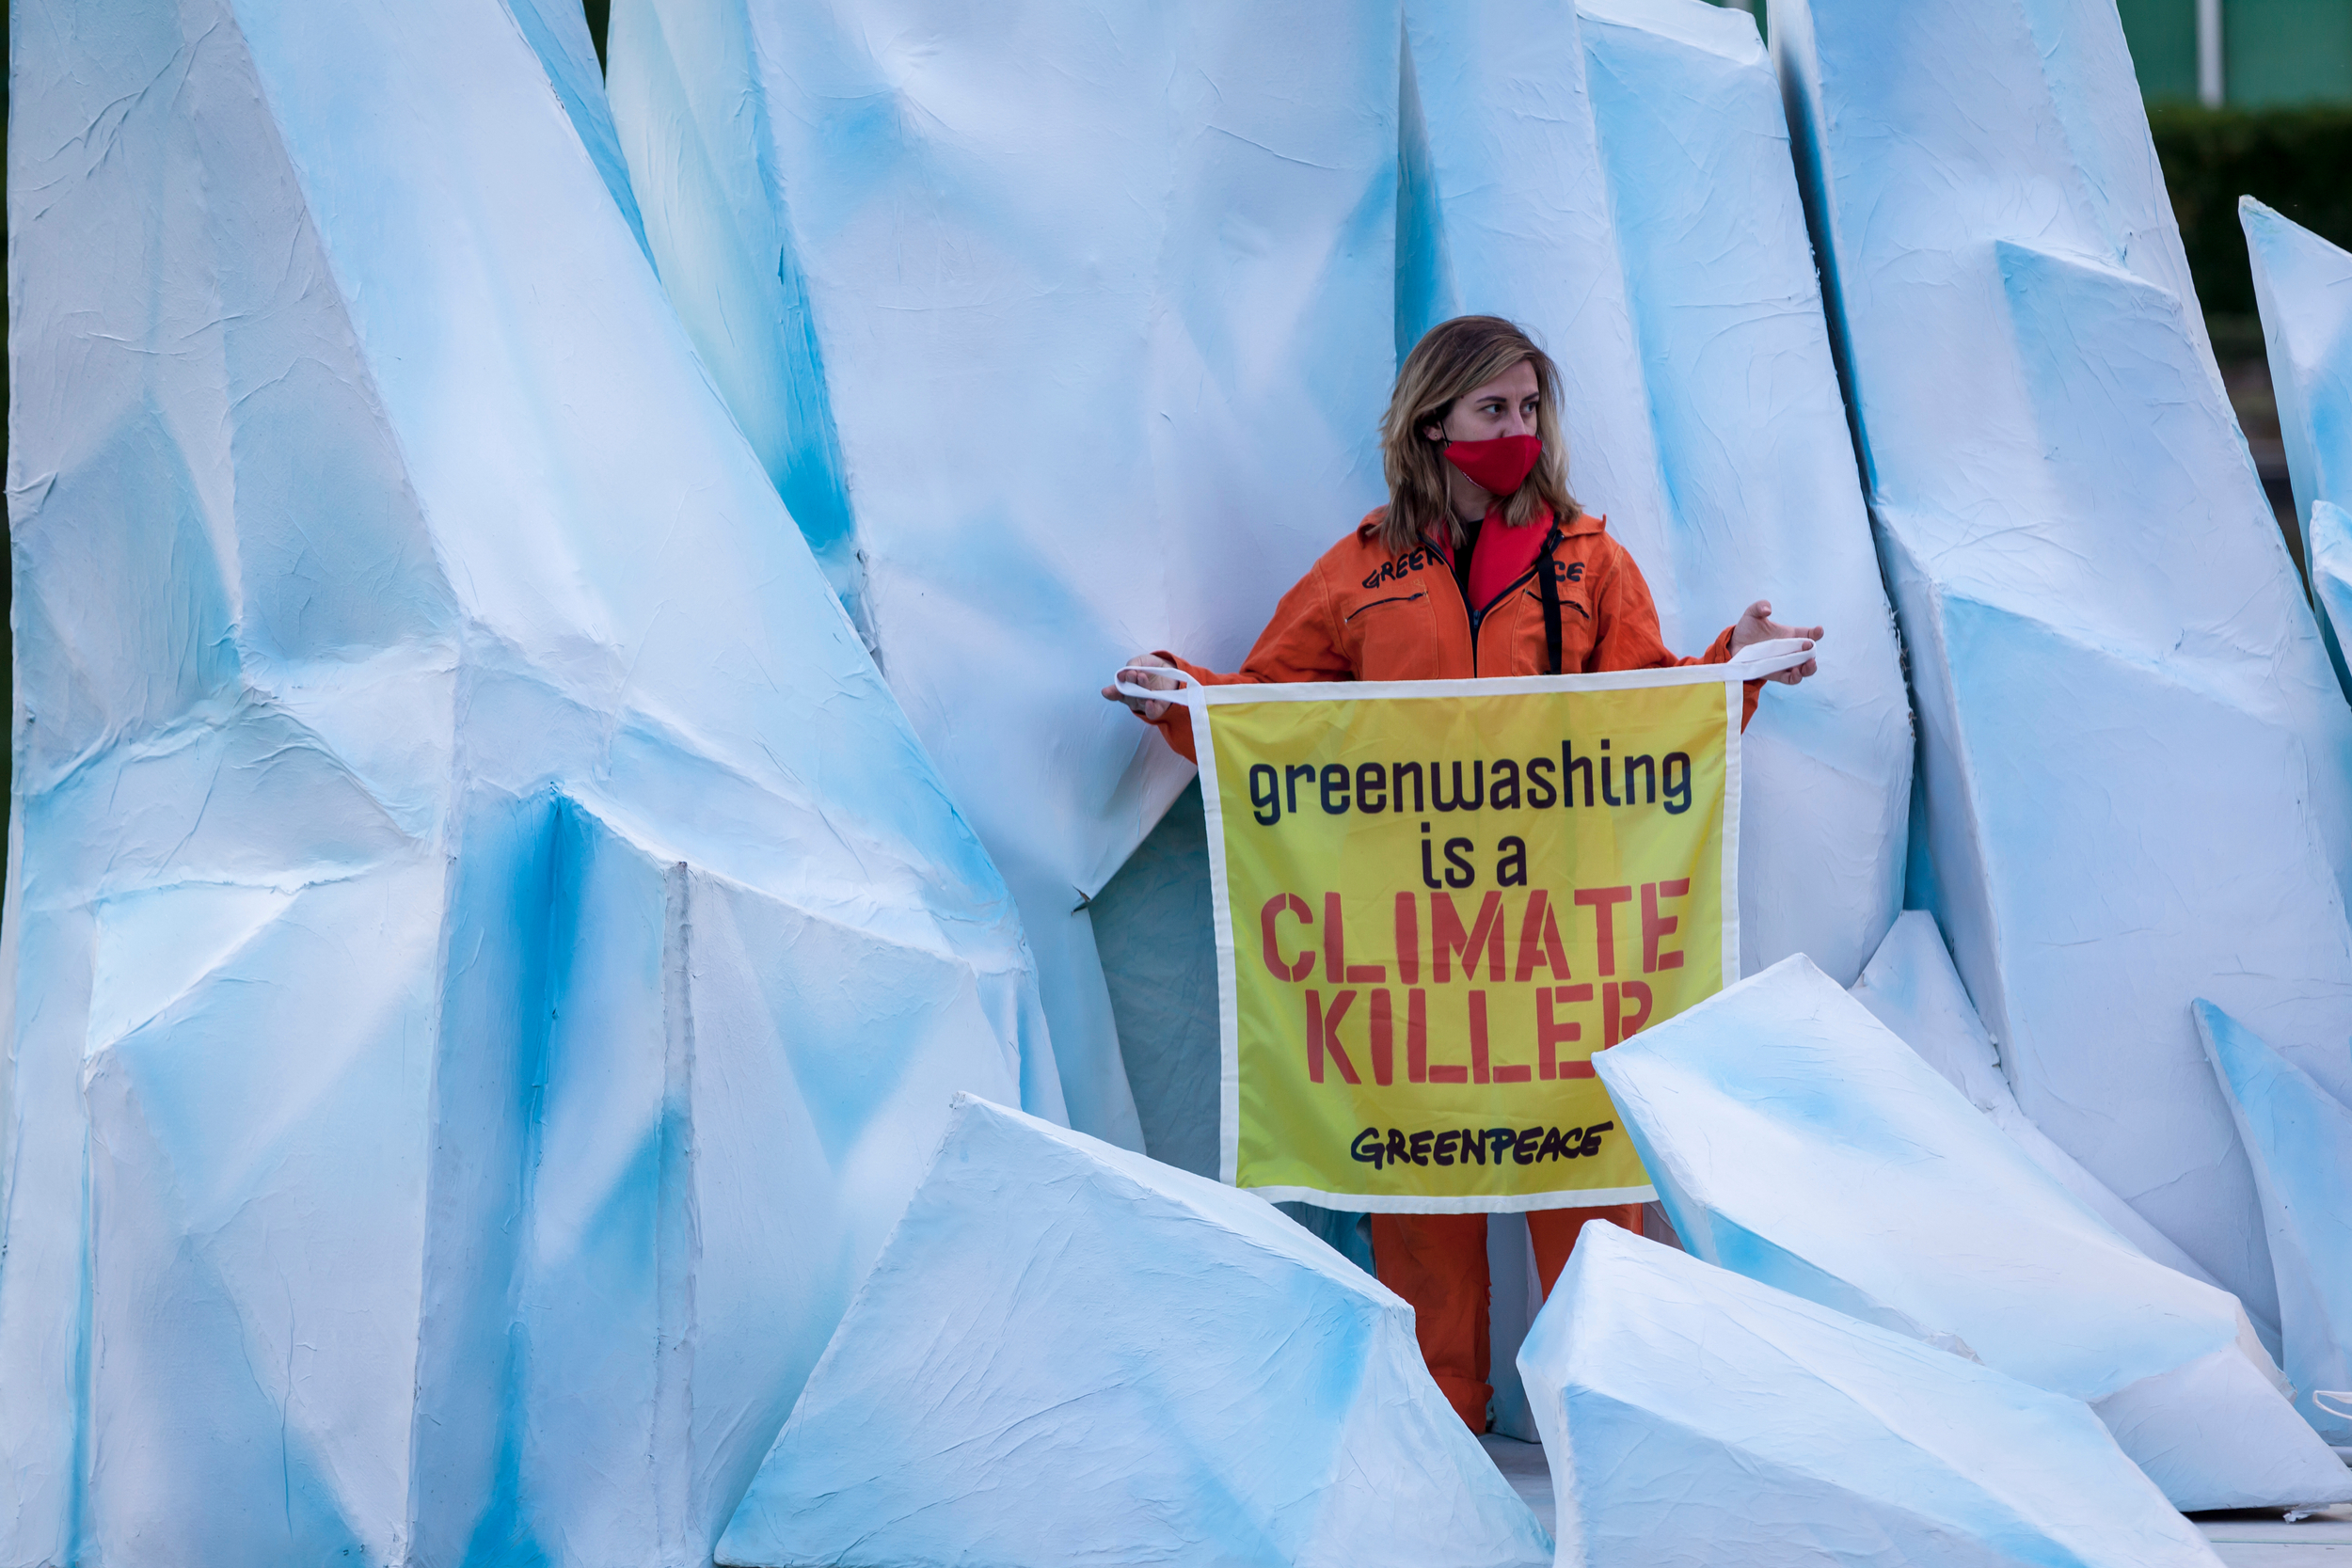 Activist stands holding a sign that reads “Greenwashing is a CLIMATE KILLER”. They stand on a floating reproduction of a melting iceberg.